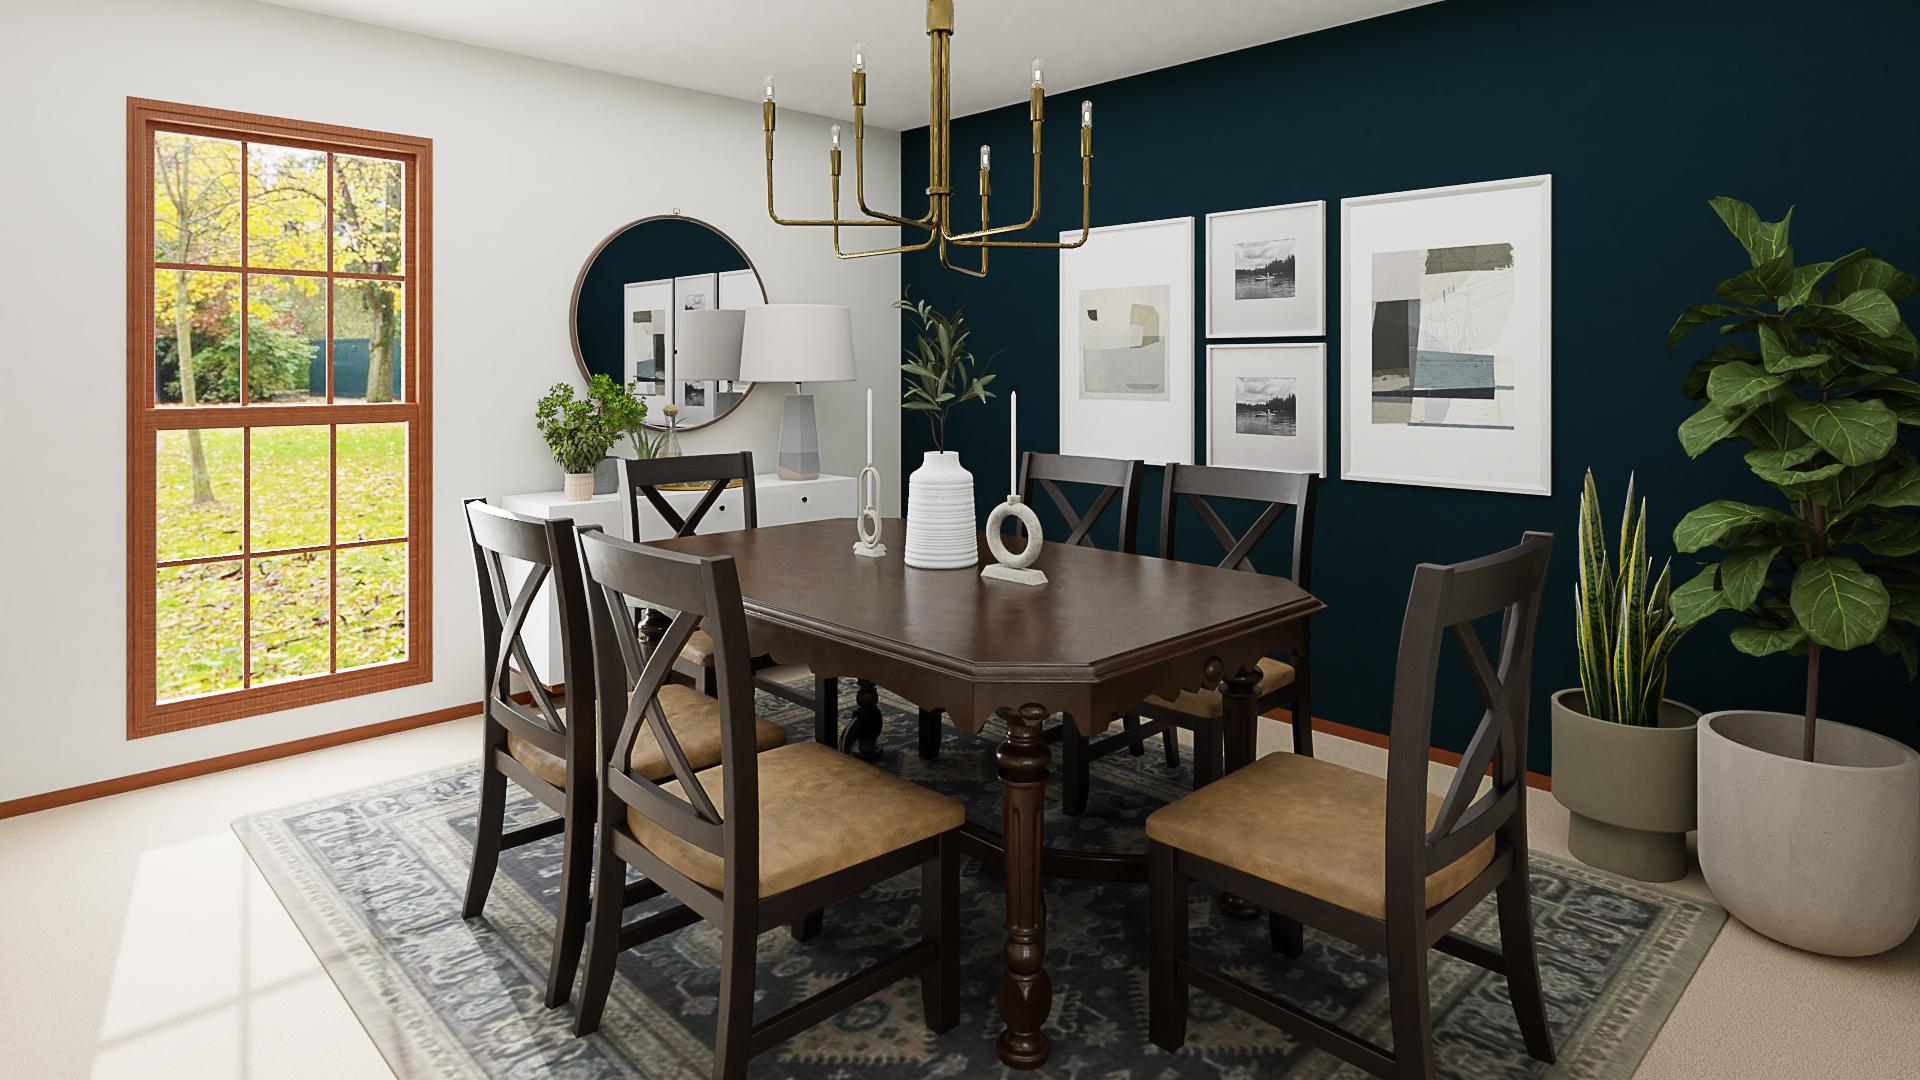 A Farmhouse Dining Room With A Midnight Blue Accent Wall